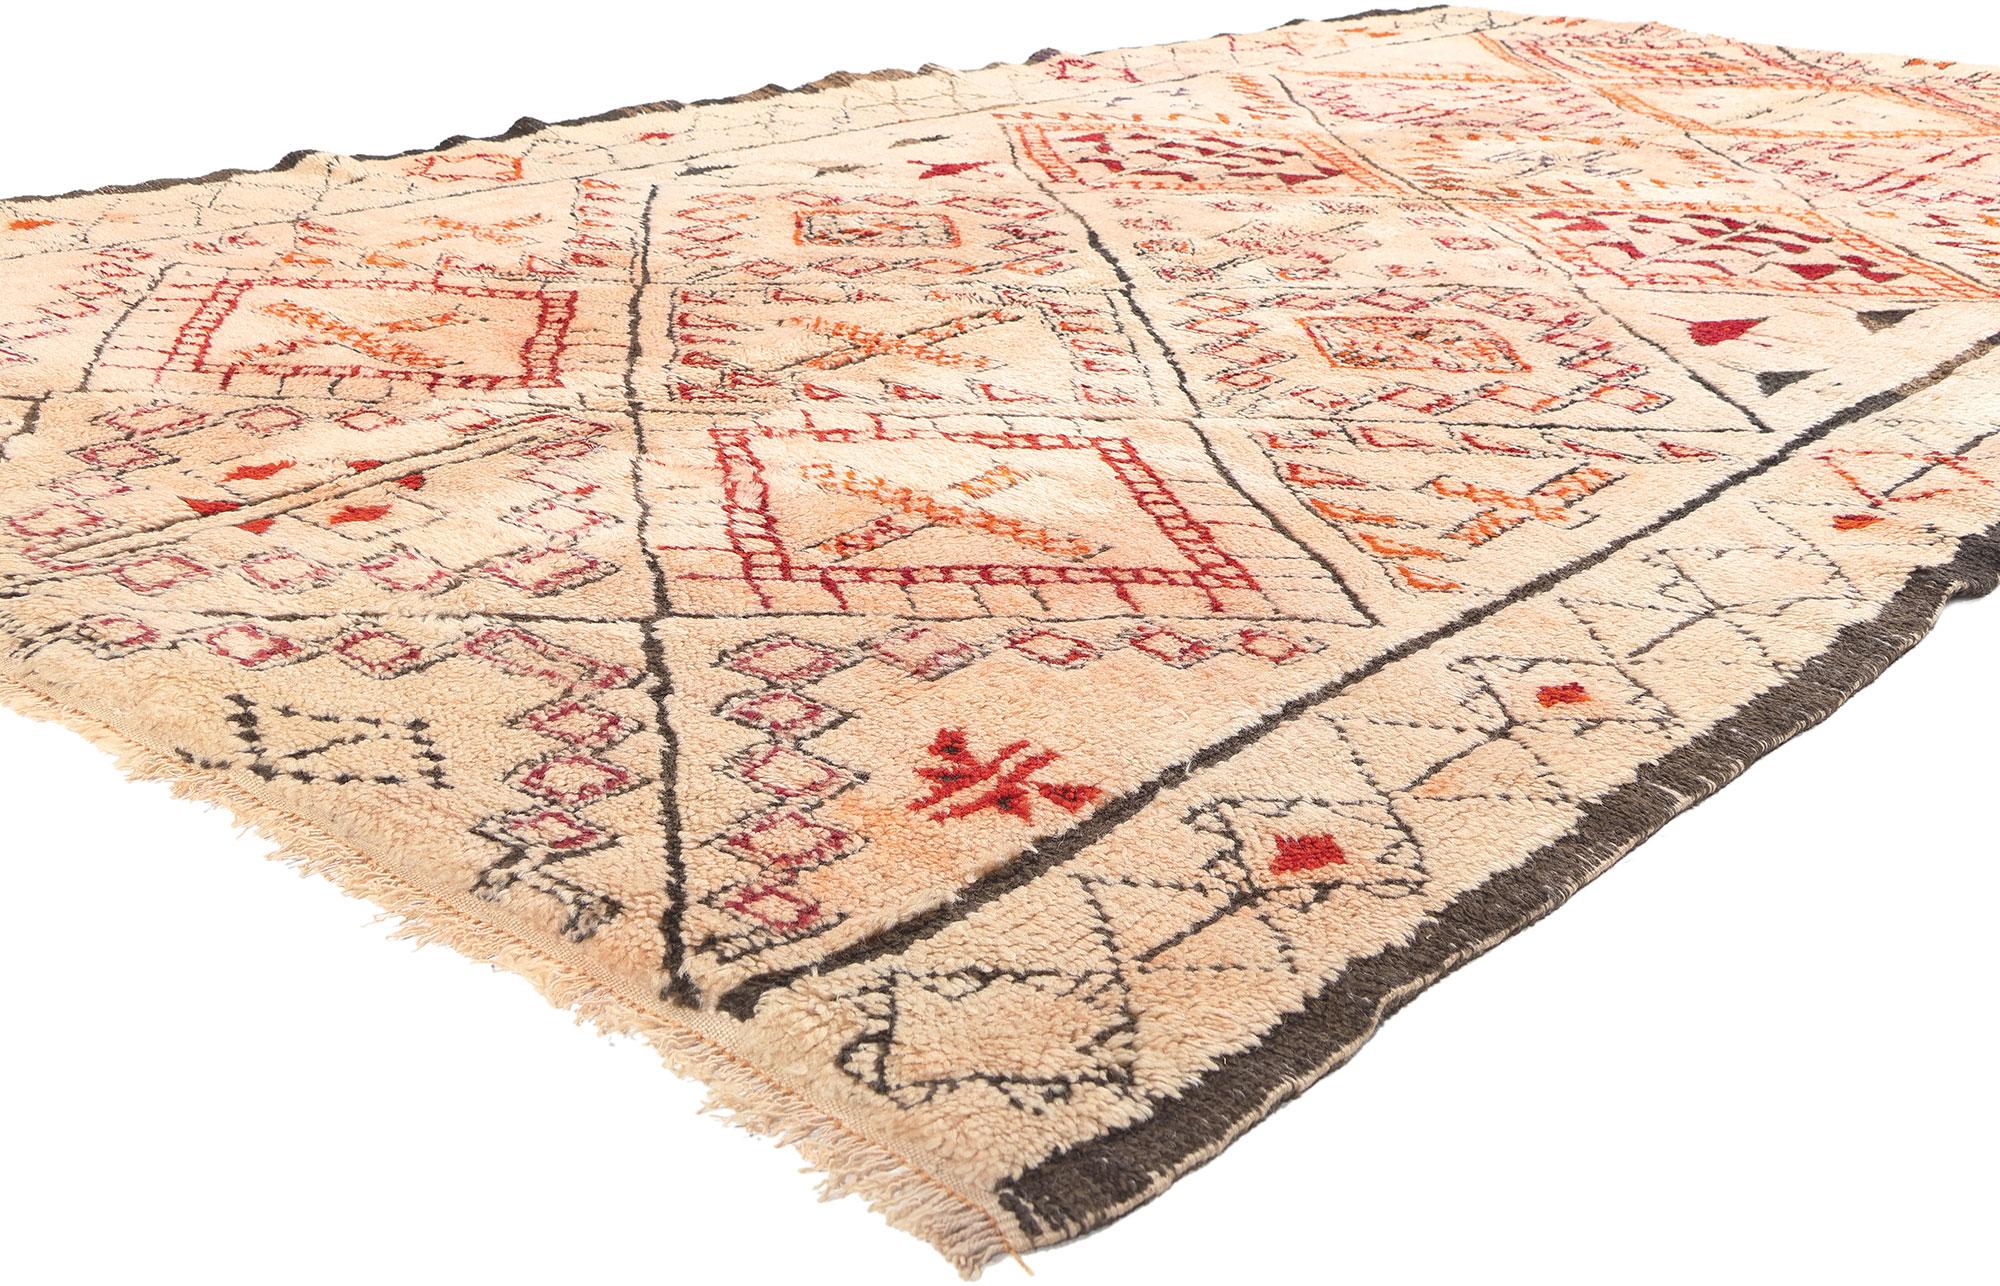 20243 Vintage Moroccan Beni Ourain Rug 06'07 x 11'08.
Nomadic charm collides with Midcentury Modern style in this hand knotted wool vintage Moroccan Beni Ourain rug. The meticulous tribal design and earthy colors woven into this piece work together